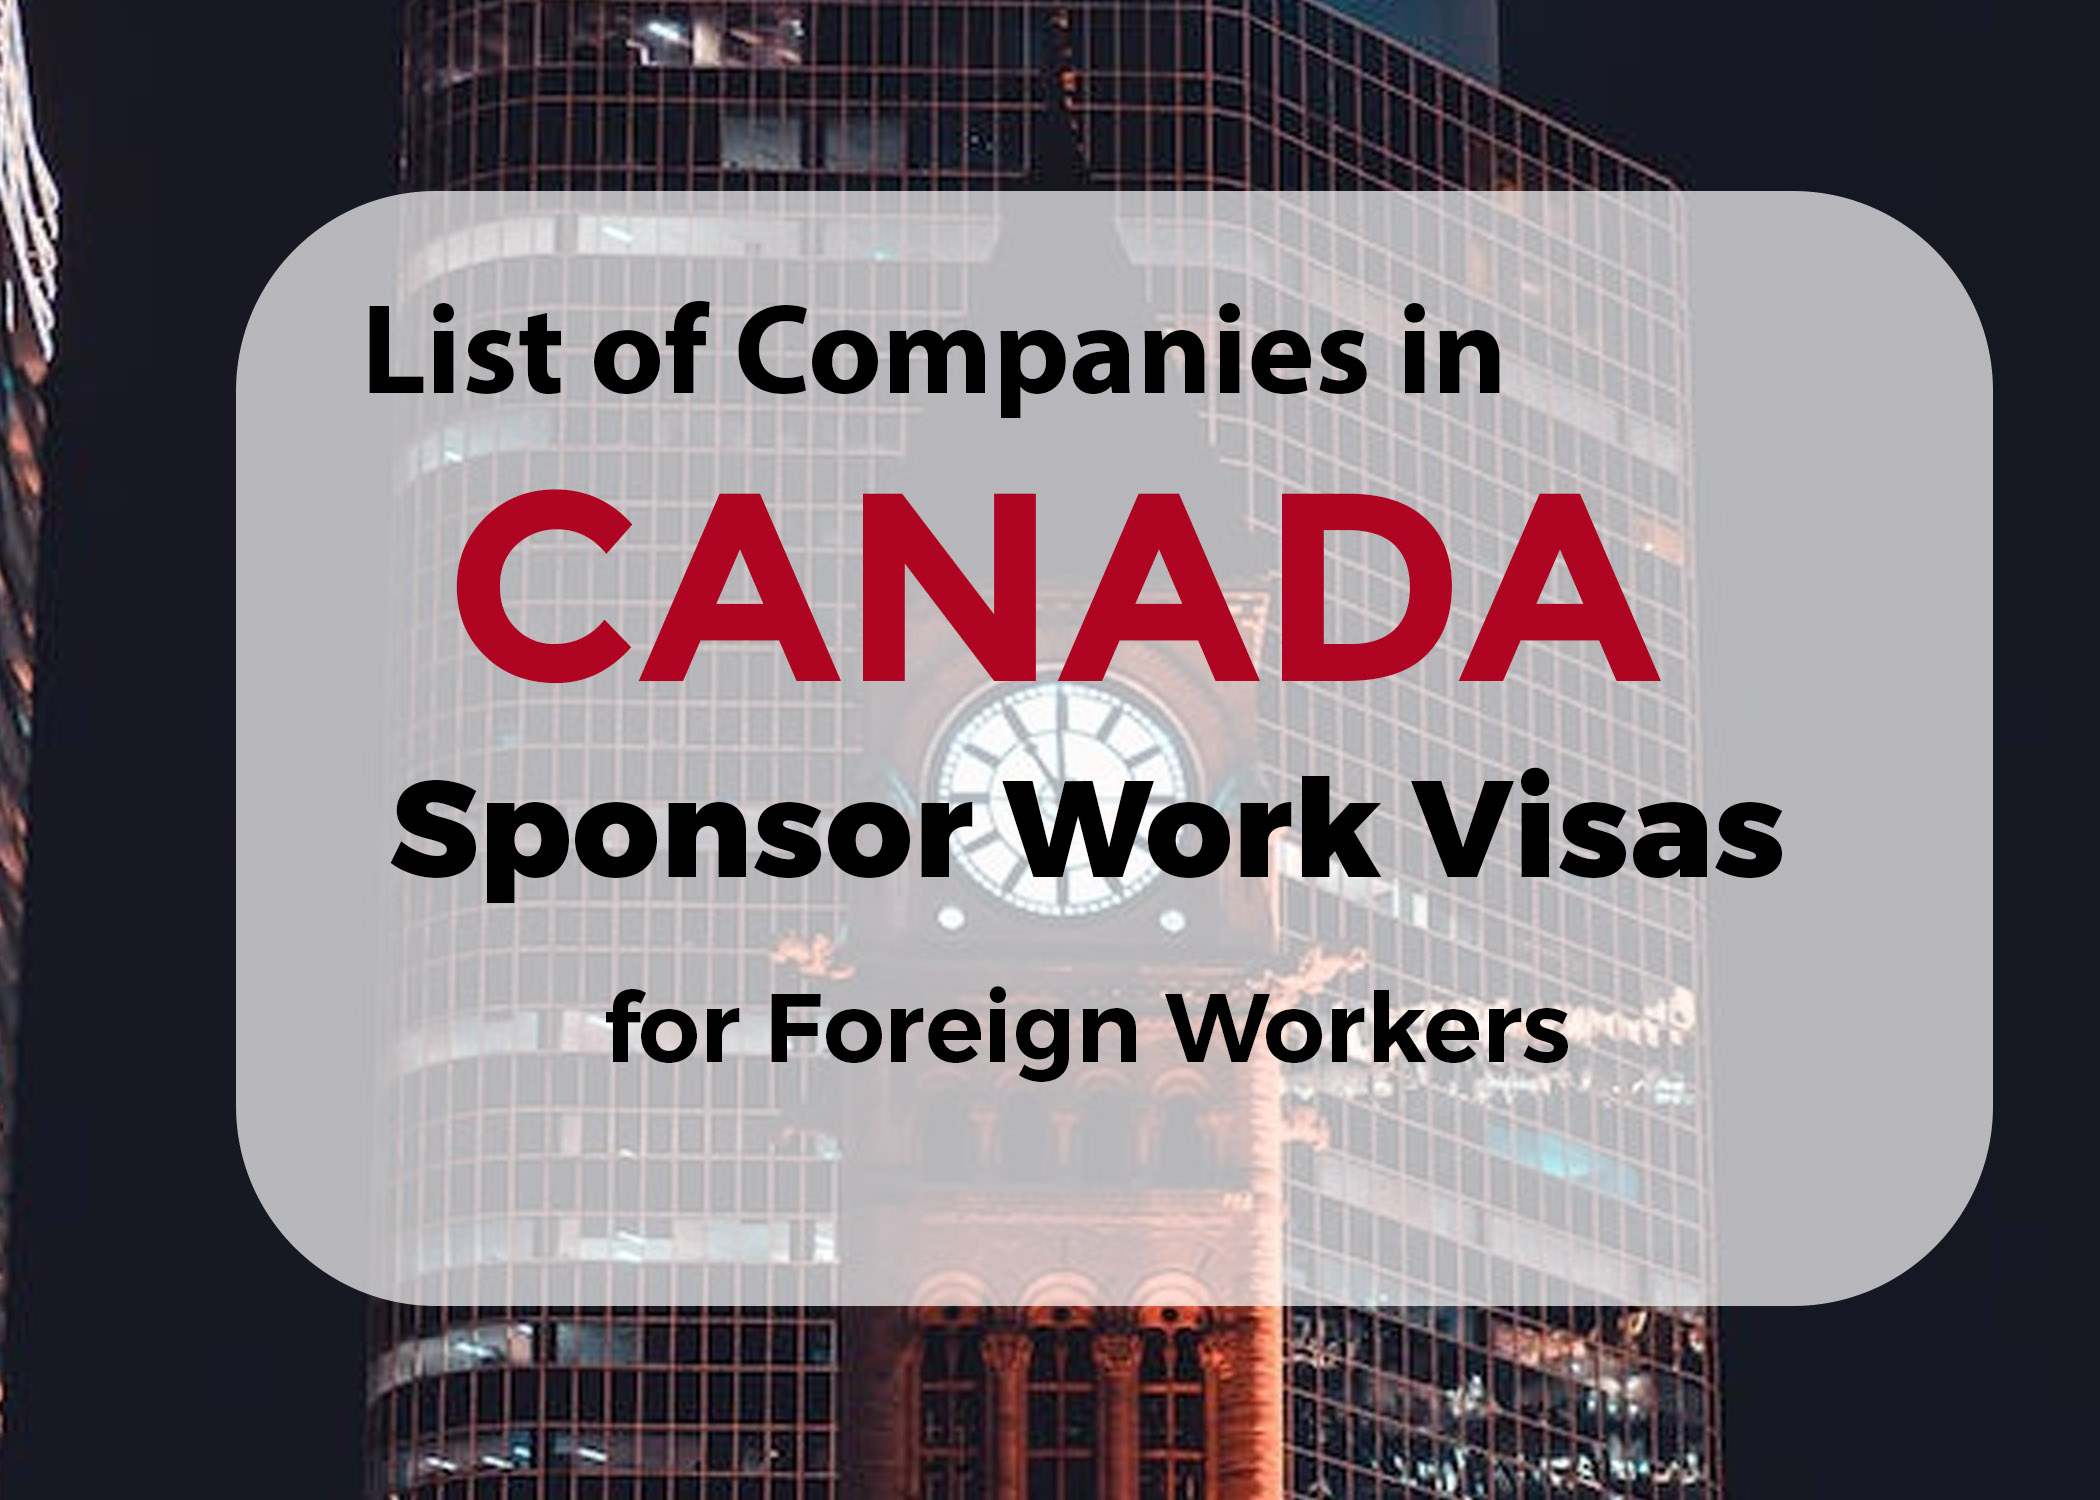 List of Companies in CANADA that Sponsor Work Visas for Foreign Workers